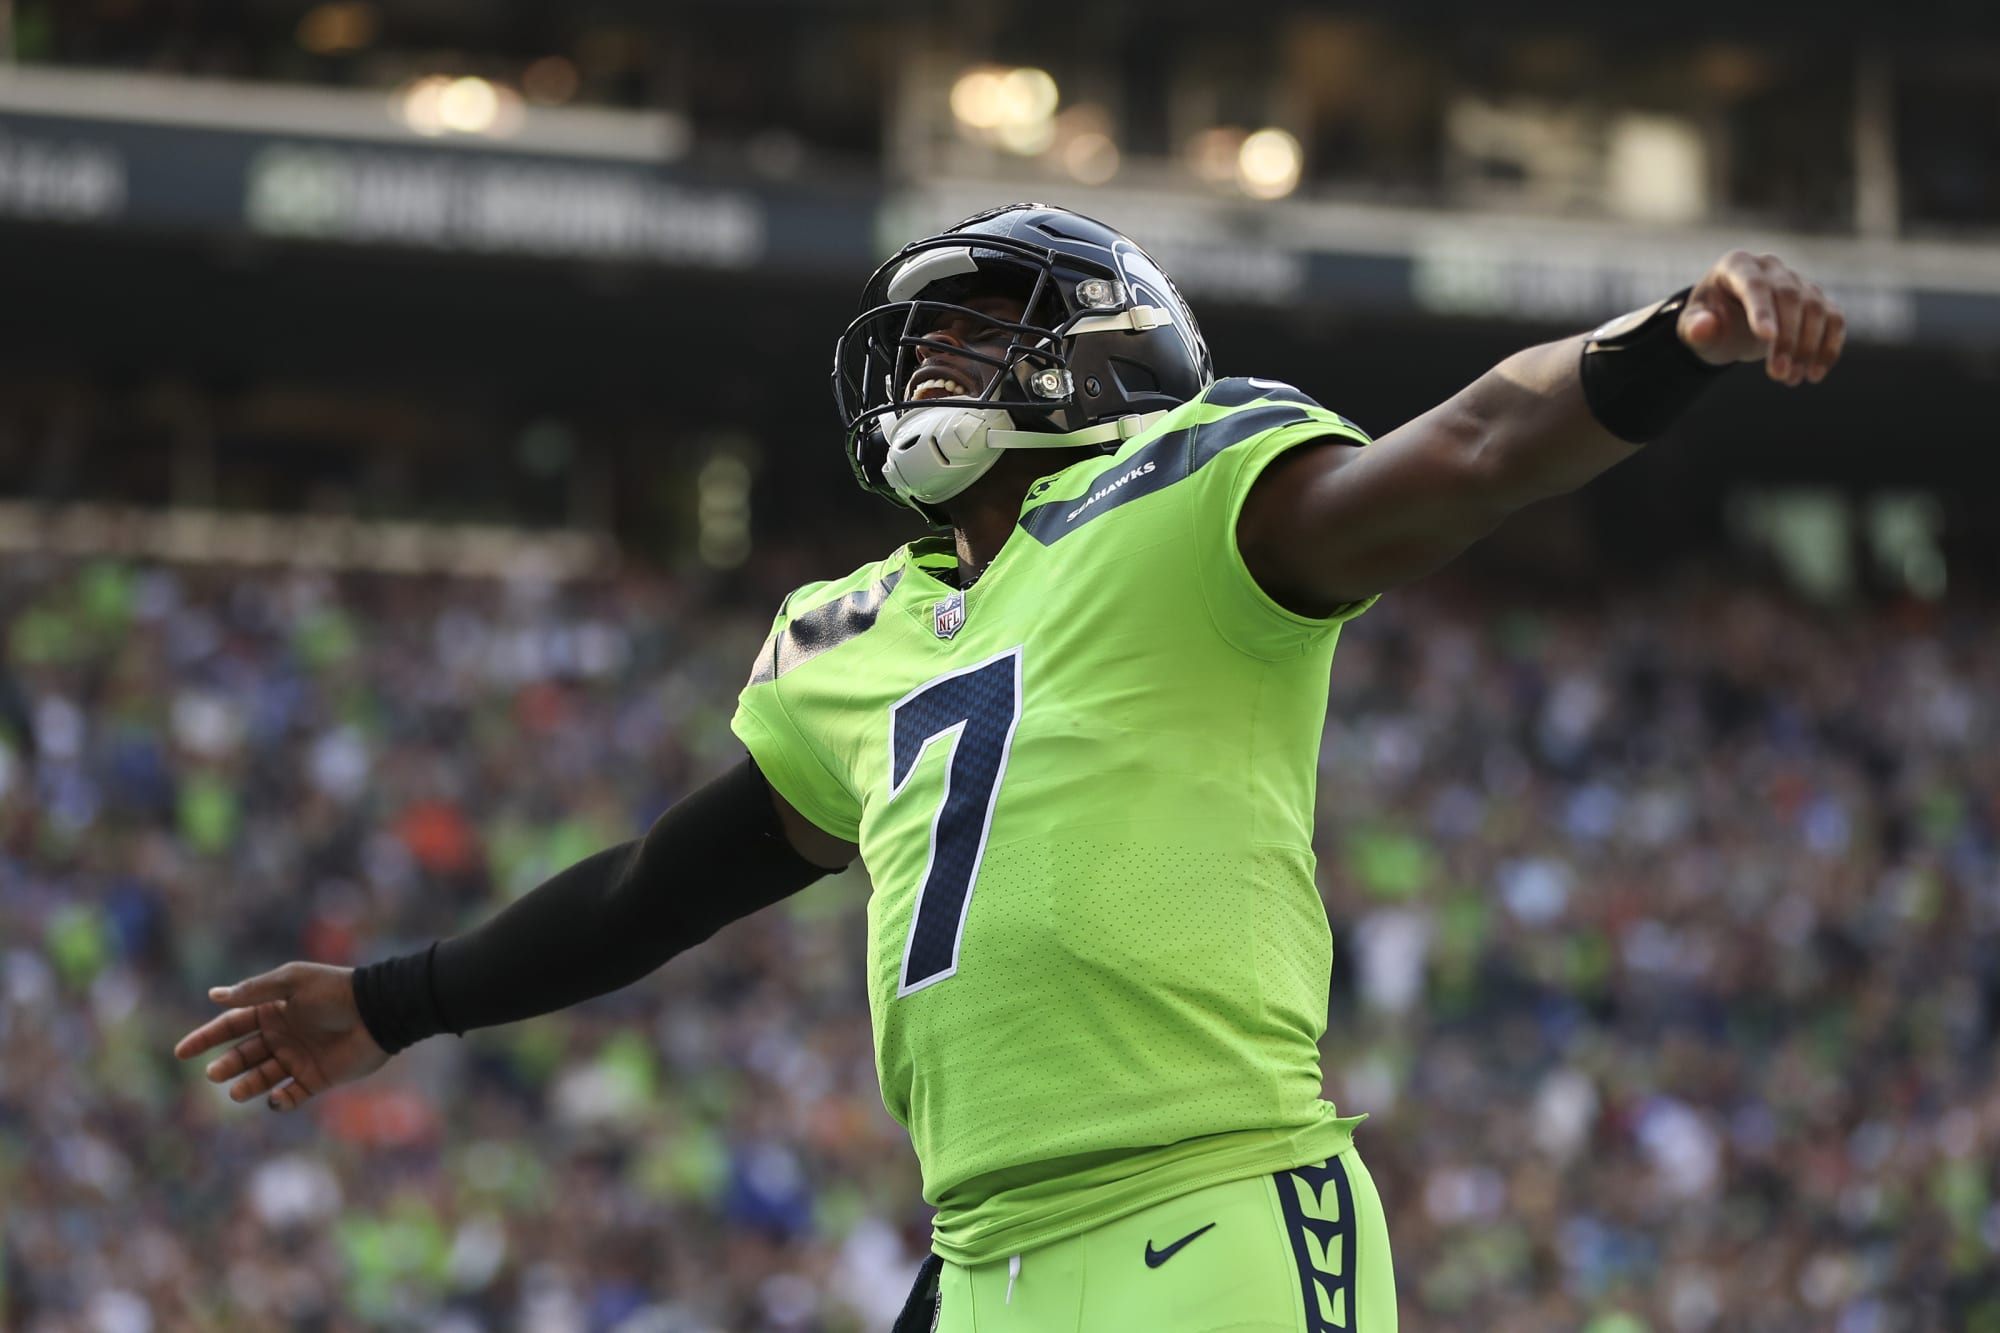 Seattle Seahawks Geno Smith's resolve pays off in Week 1